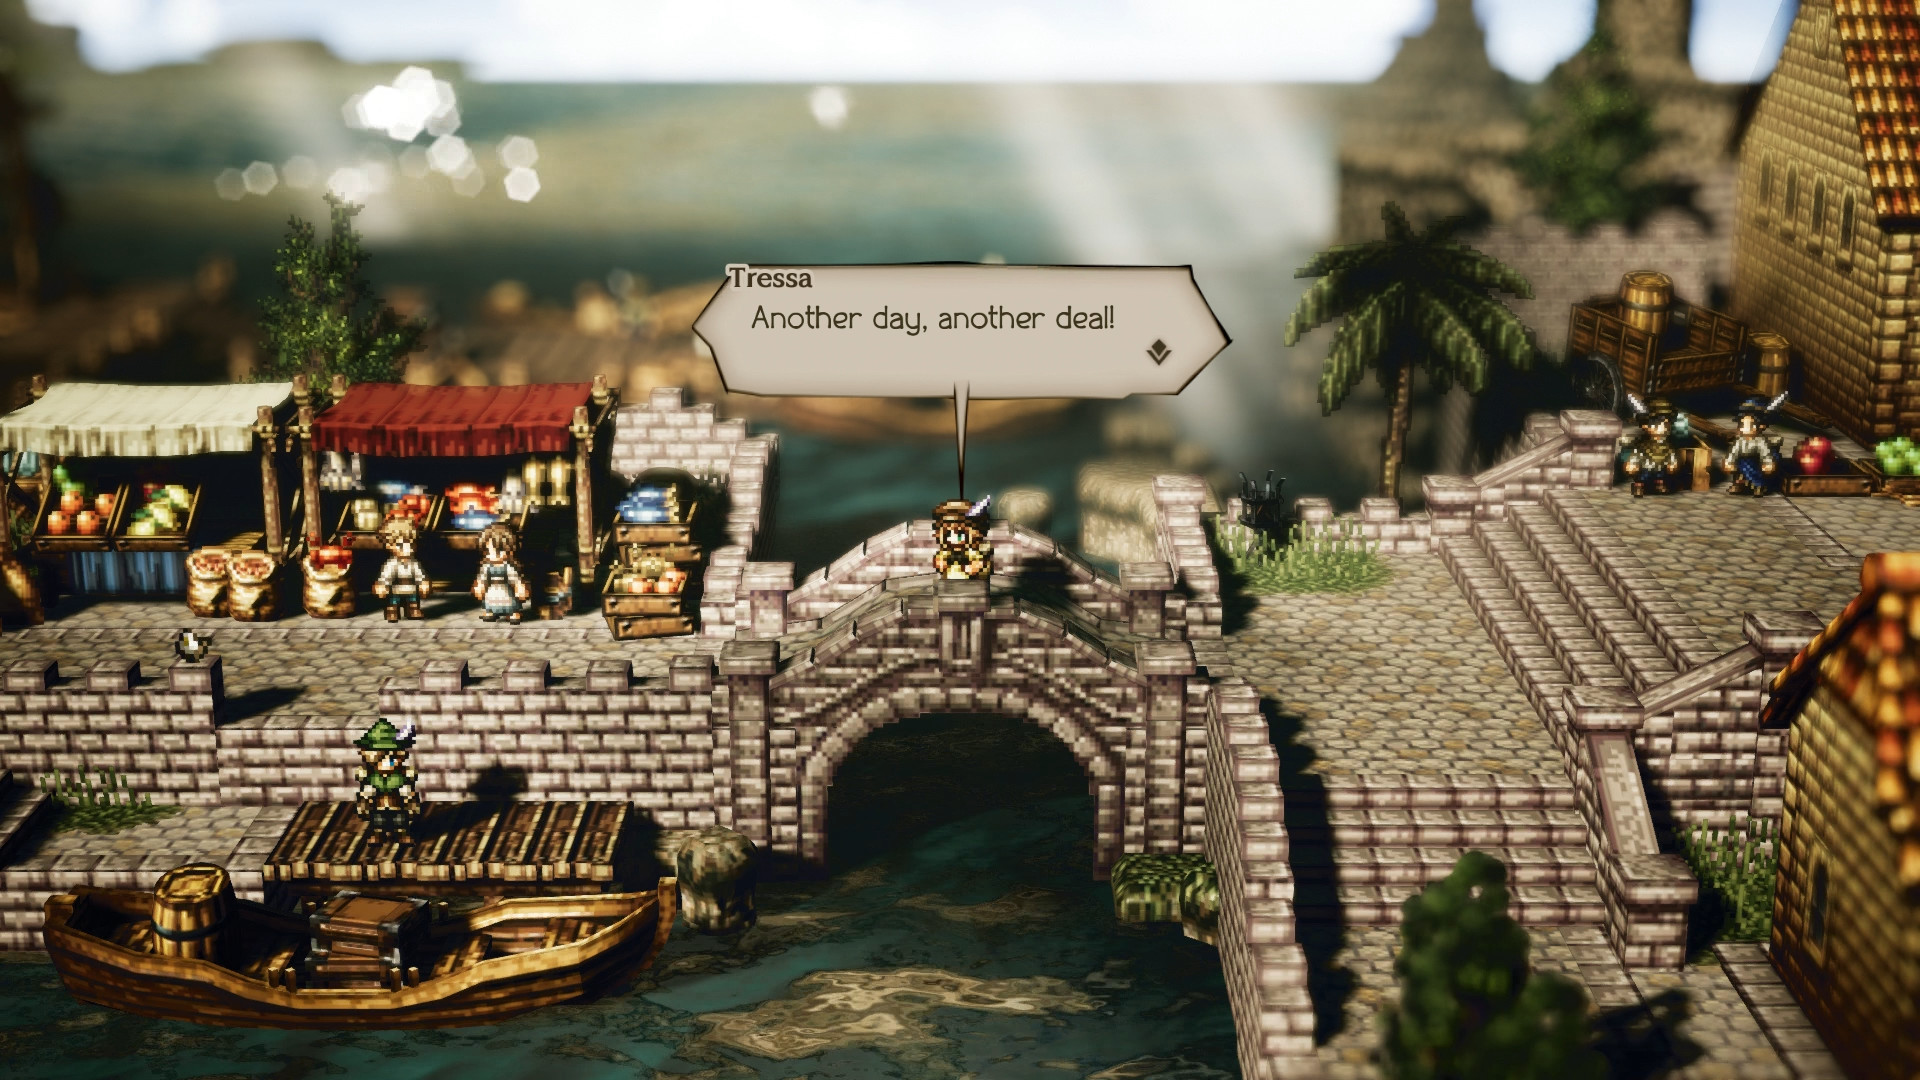 Buy OCTOPATH TRAVELER™ from the Humble Store